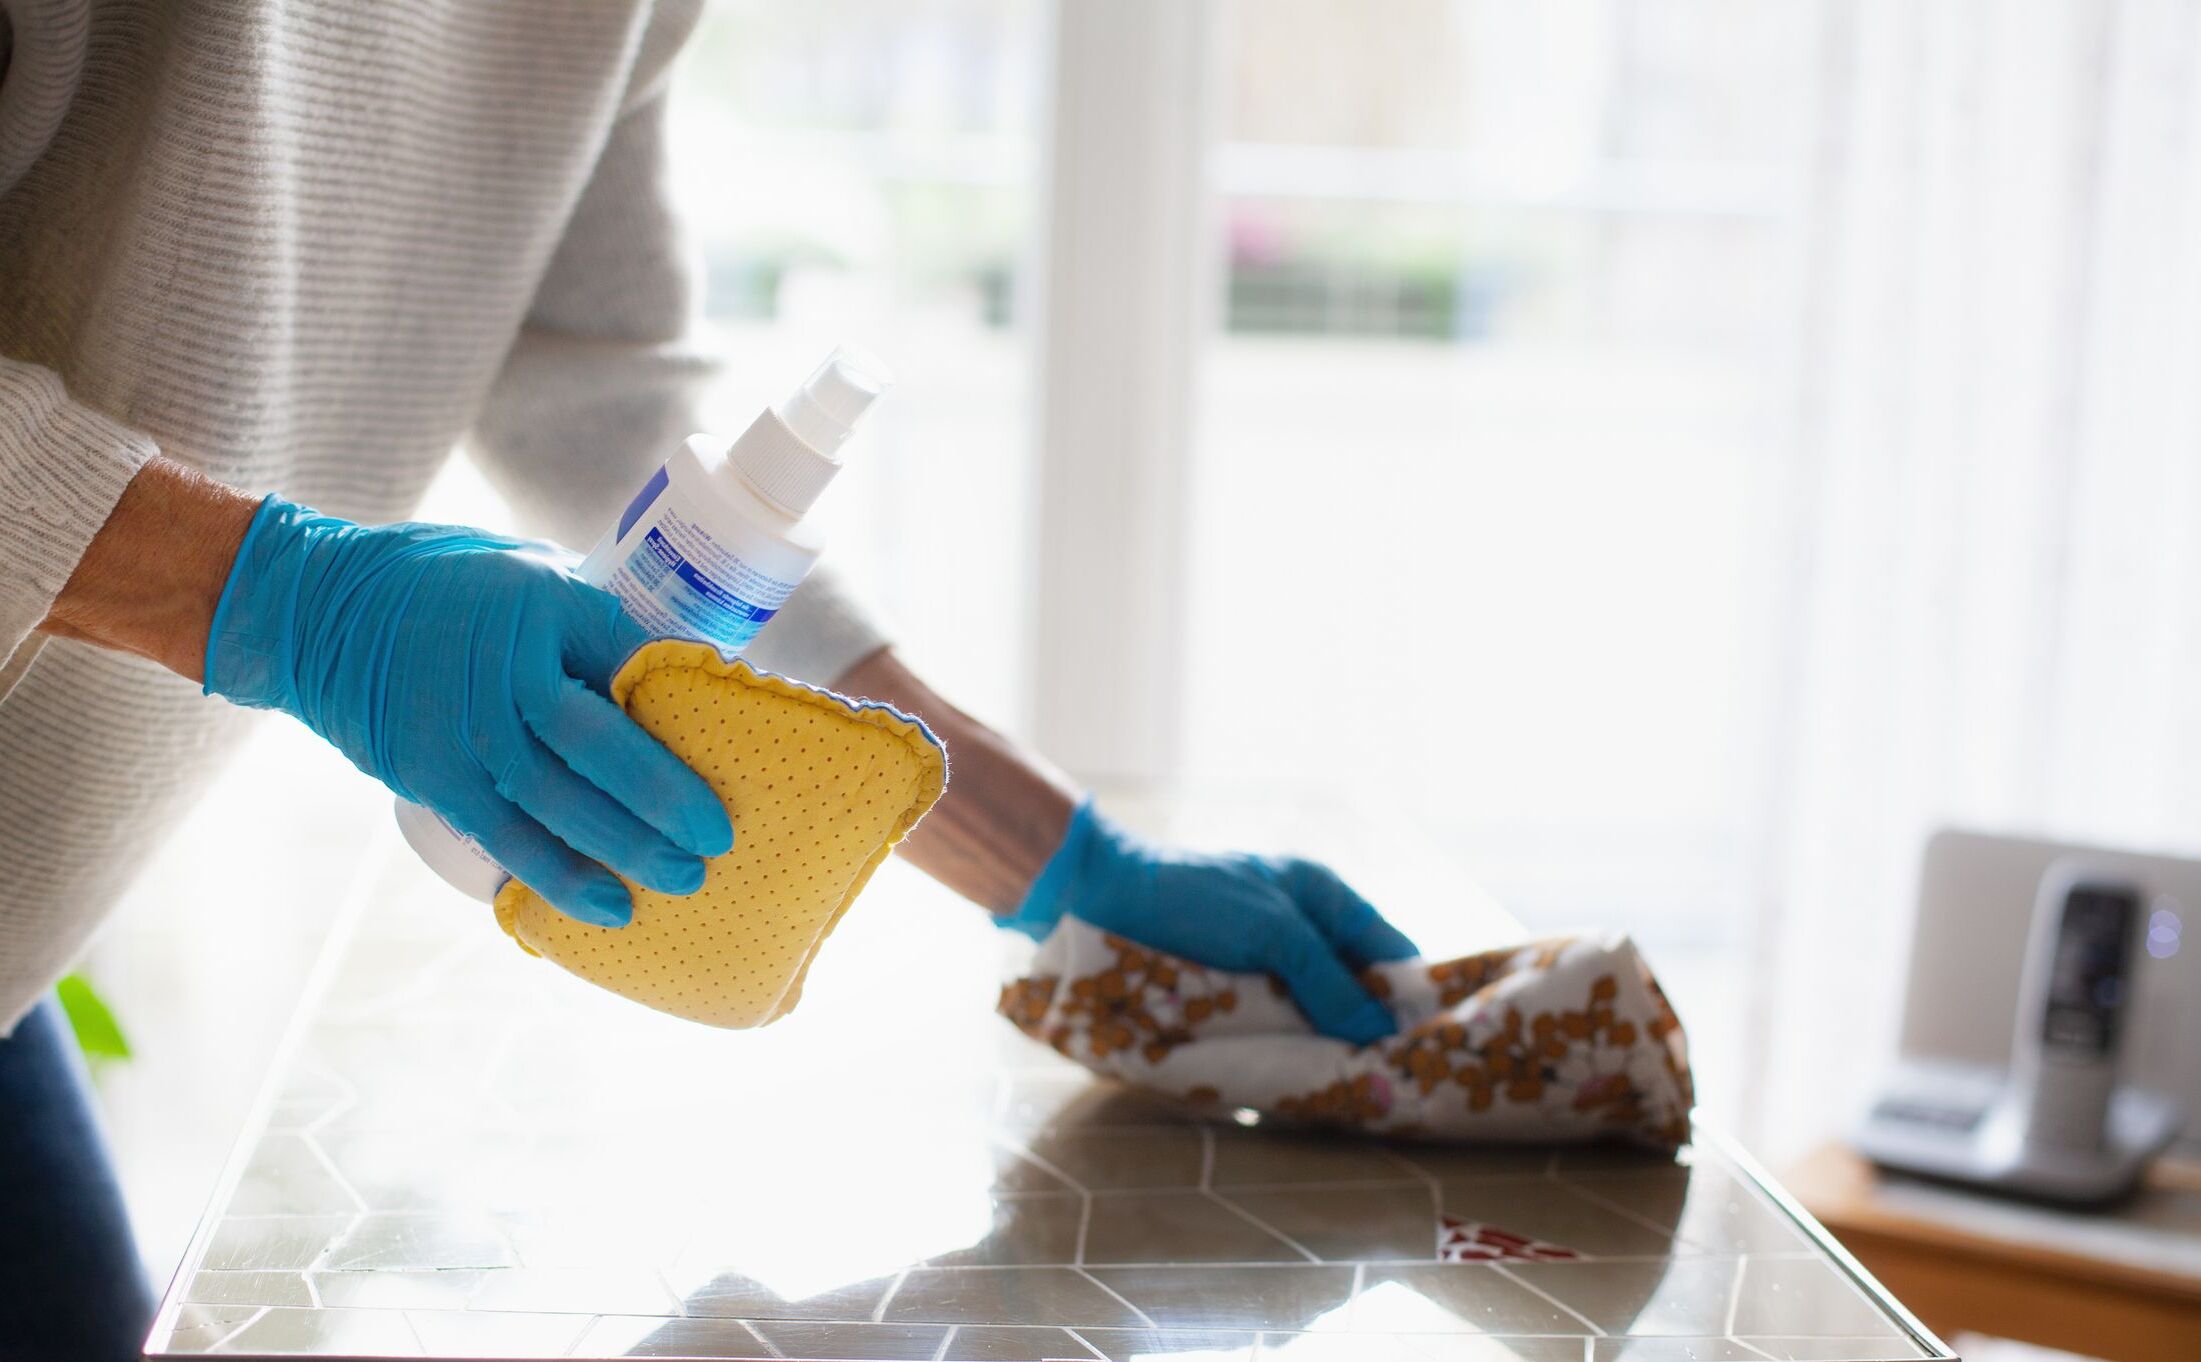 DIY Homemade Disinfectant Spray: Step-by-step Guide